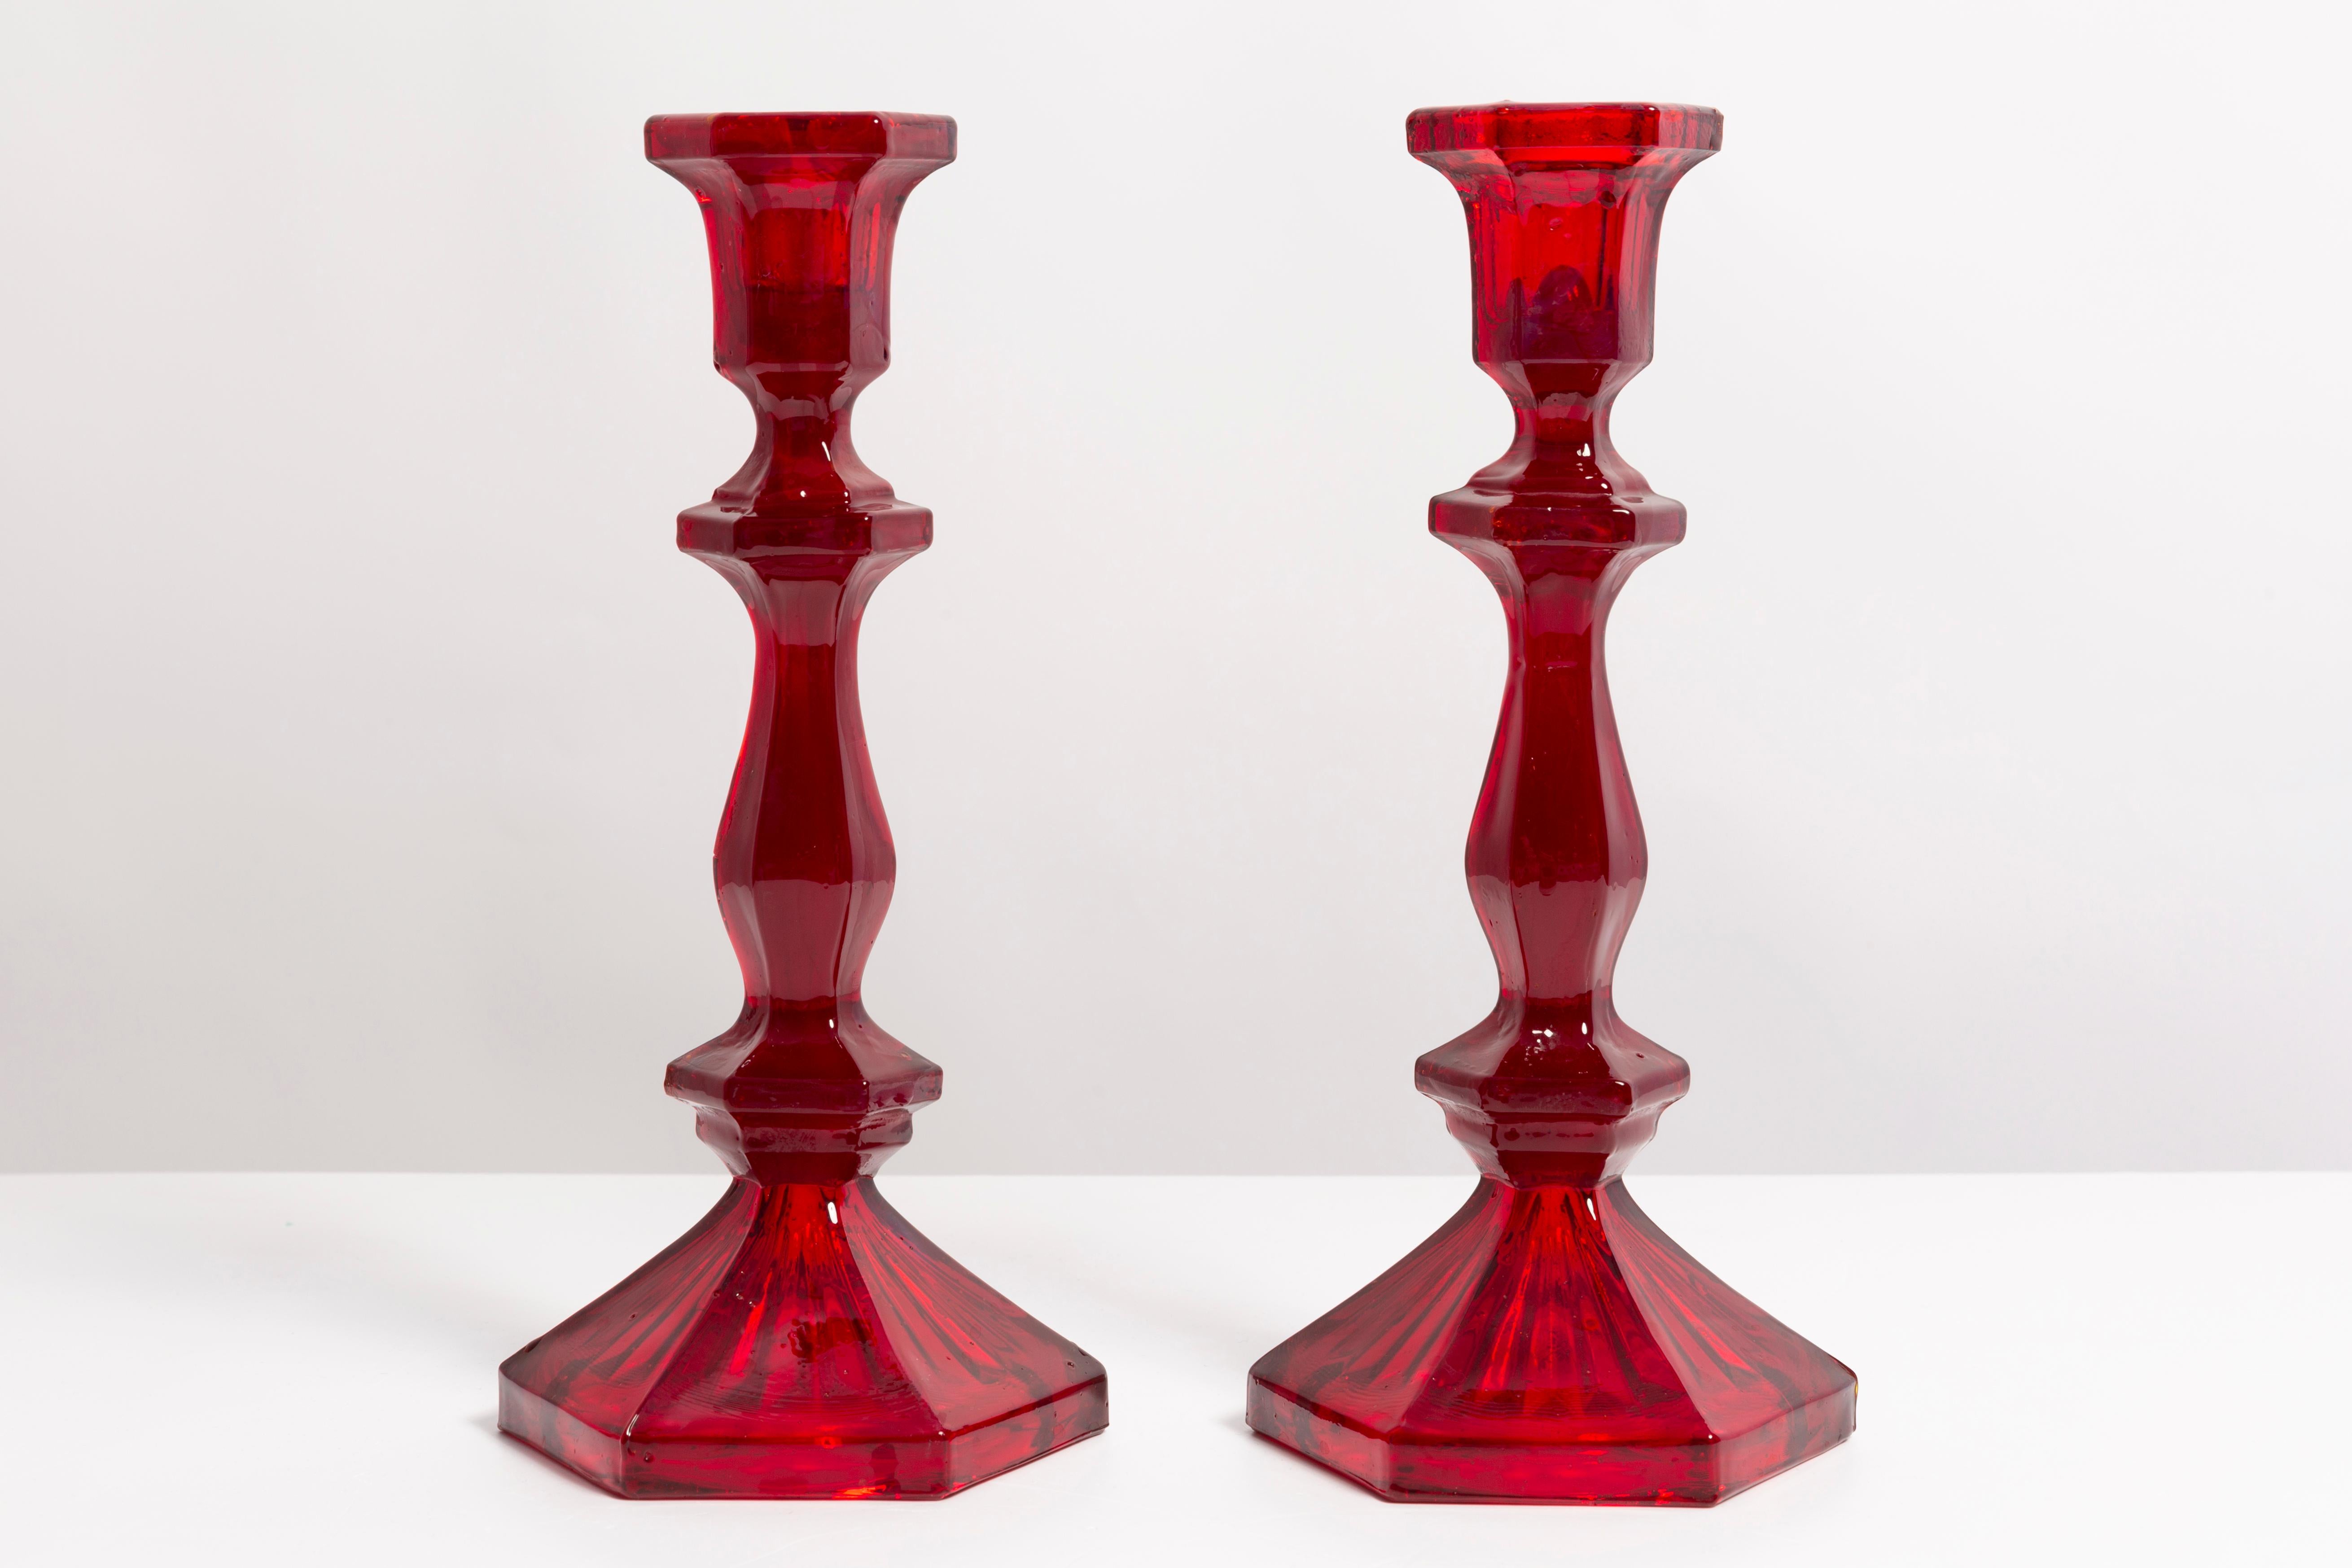 Set of two mid-century Polish modern glass candlesticks, circa 1960. Very good condition. No damages. Beautiful red glass.